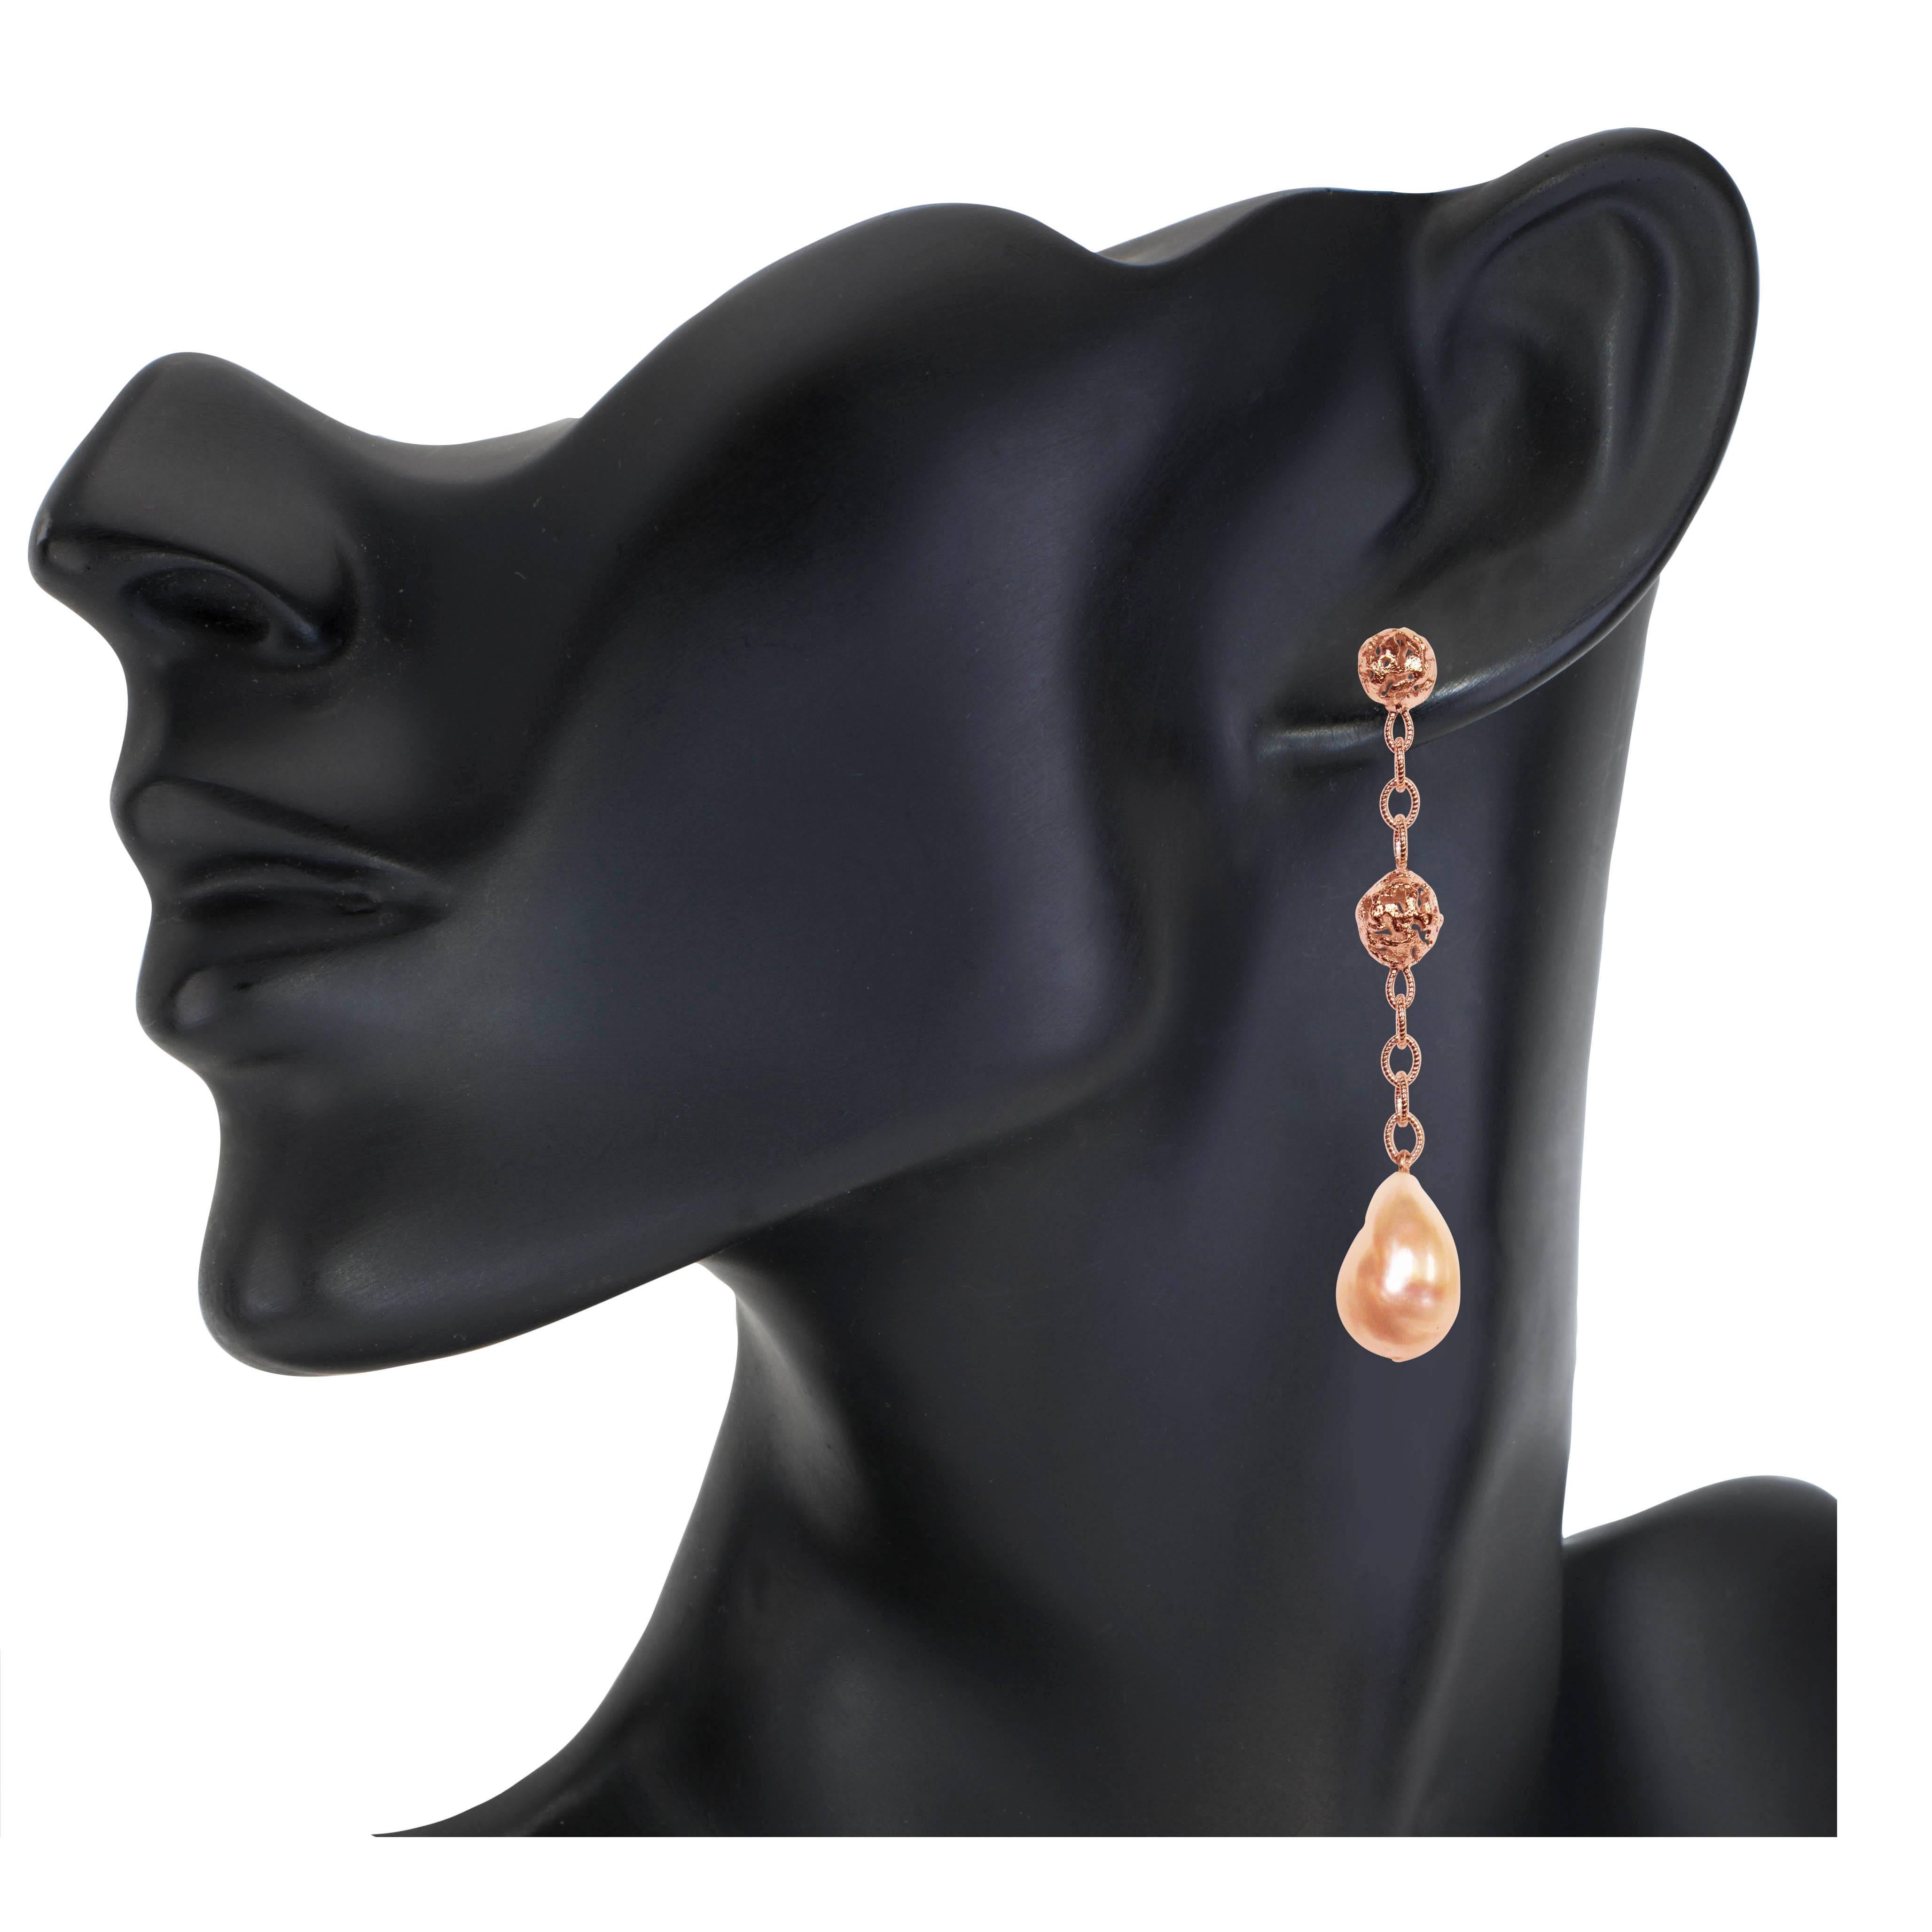 Alex Soldier Drop Dangle Pearl Earrings: made in sterling silver, infused (deep plating) with 18 karat rose gold with peach Freshwater pearls. Handmade in NYC. One of a kind. Please keep away from water, lotion and perfume to preserve color. 

About